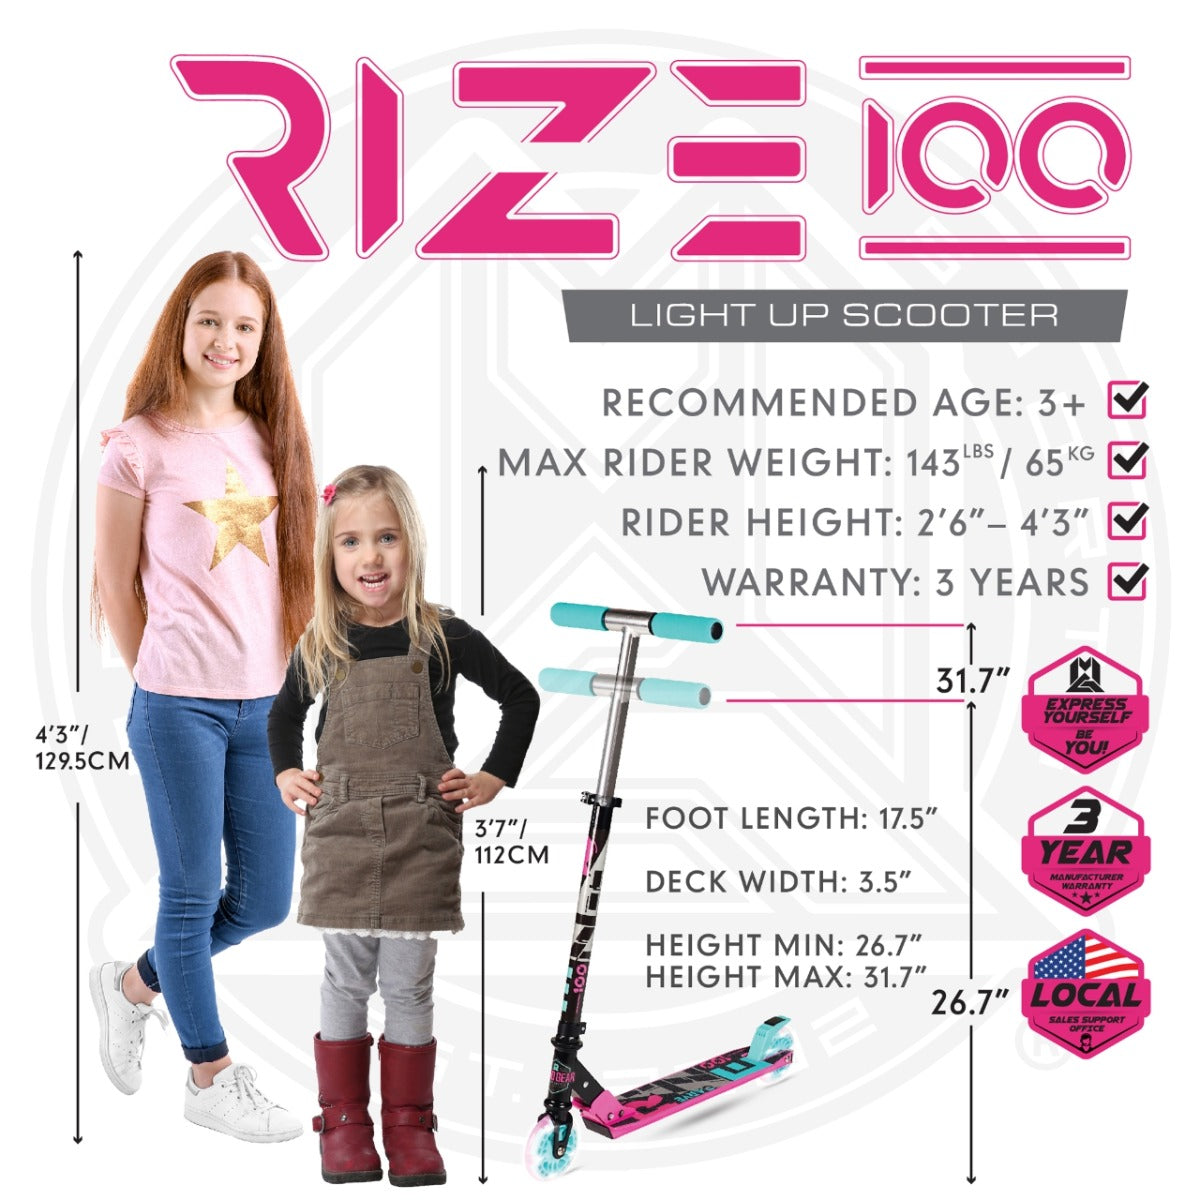 Madd Gear Carve Rize Foldable Light Up Scooter - Dreams - Specs